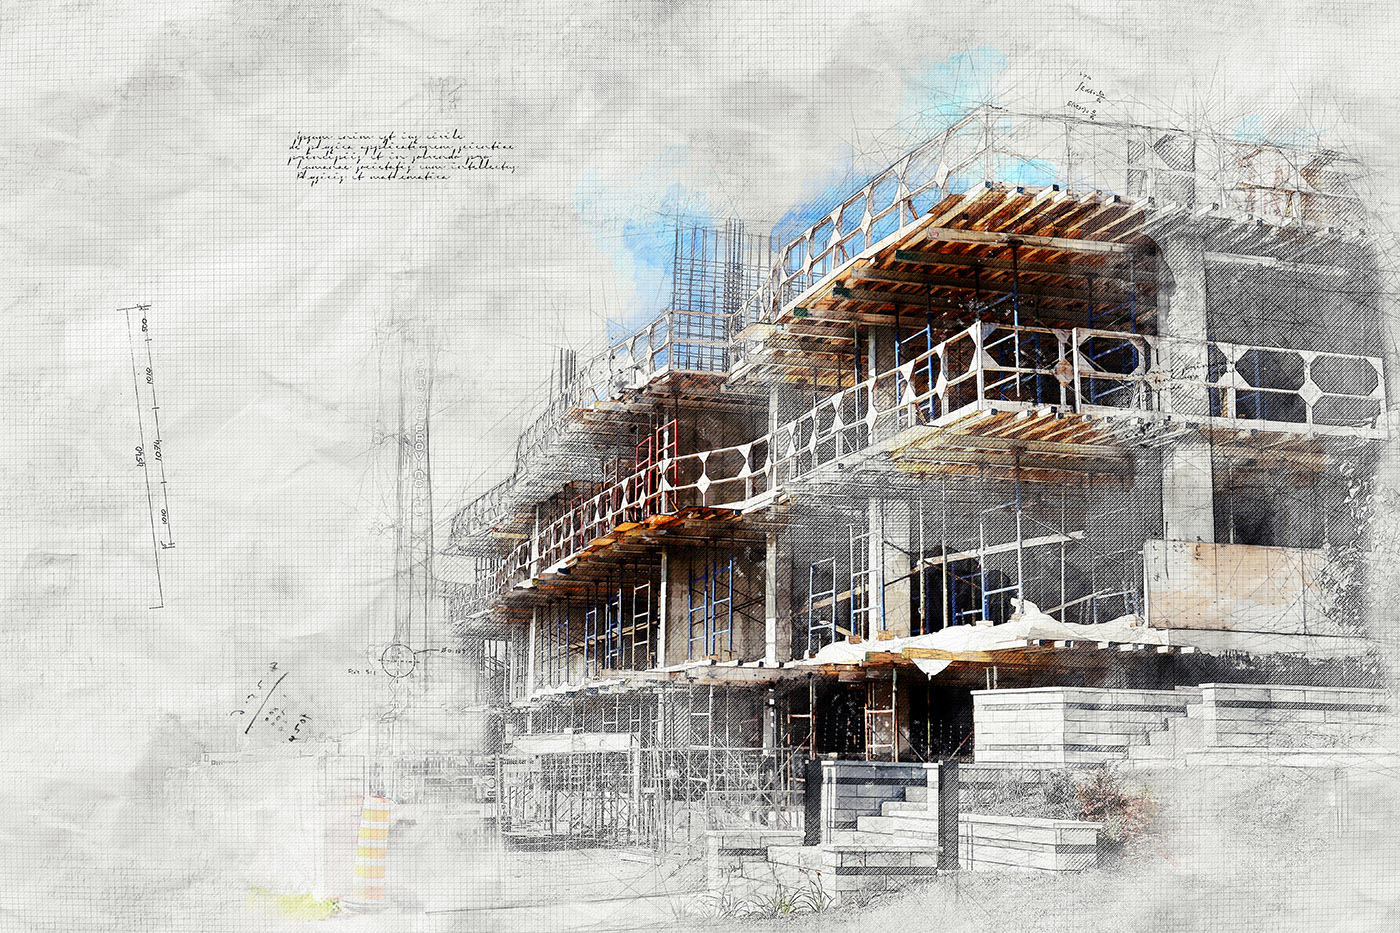 Construction Project Sketch Image - RF Stock Photo